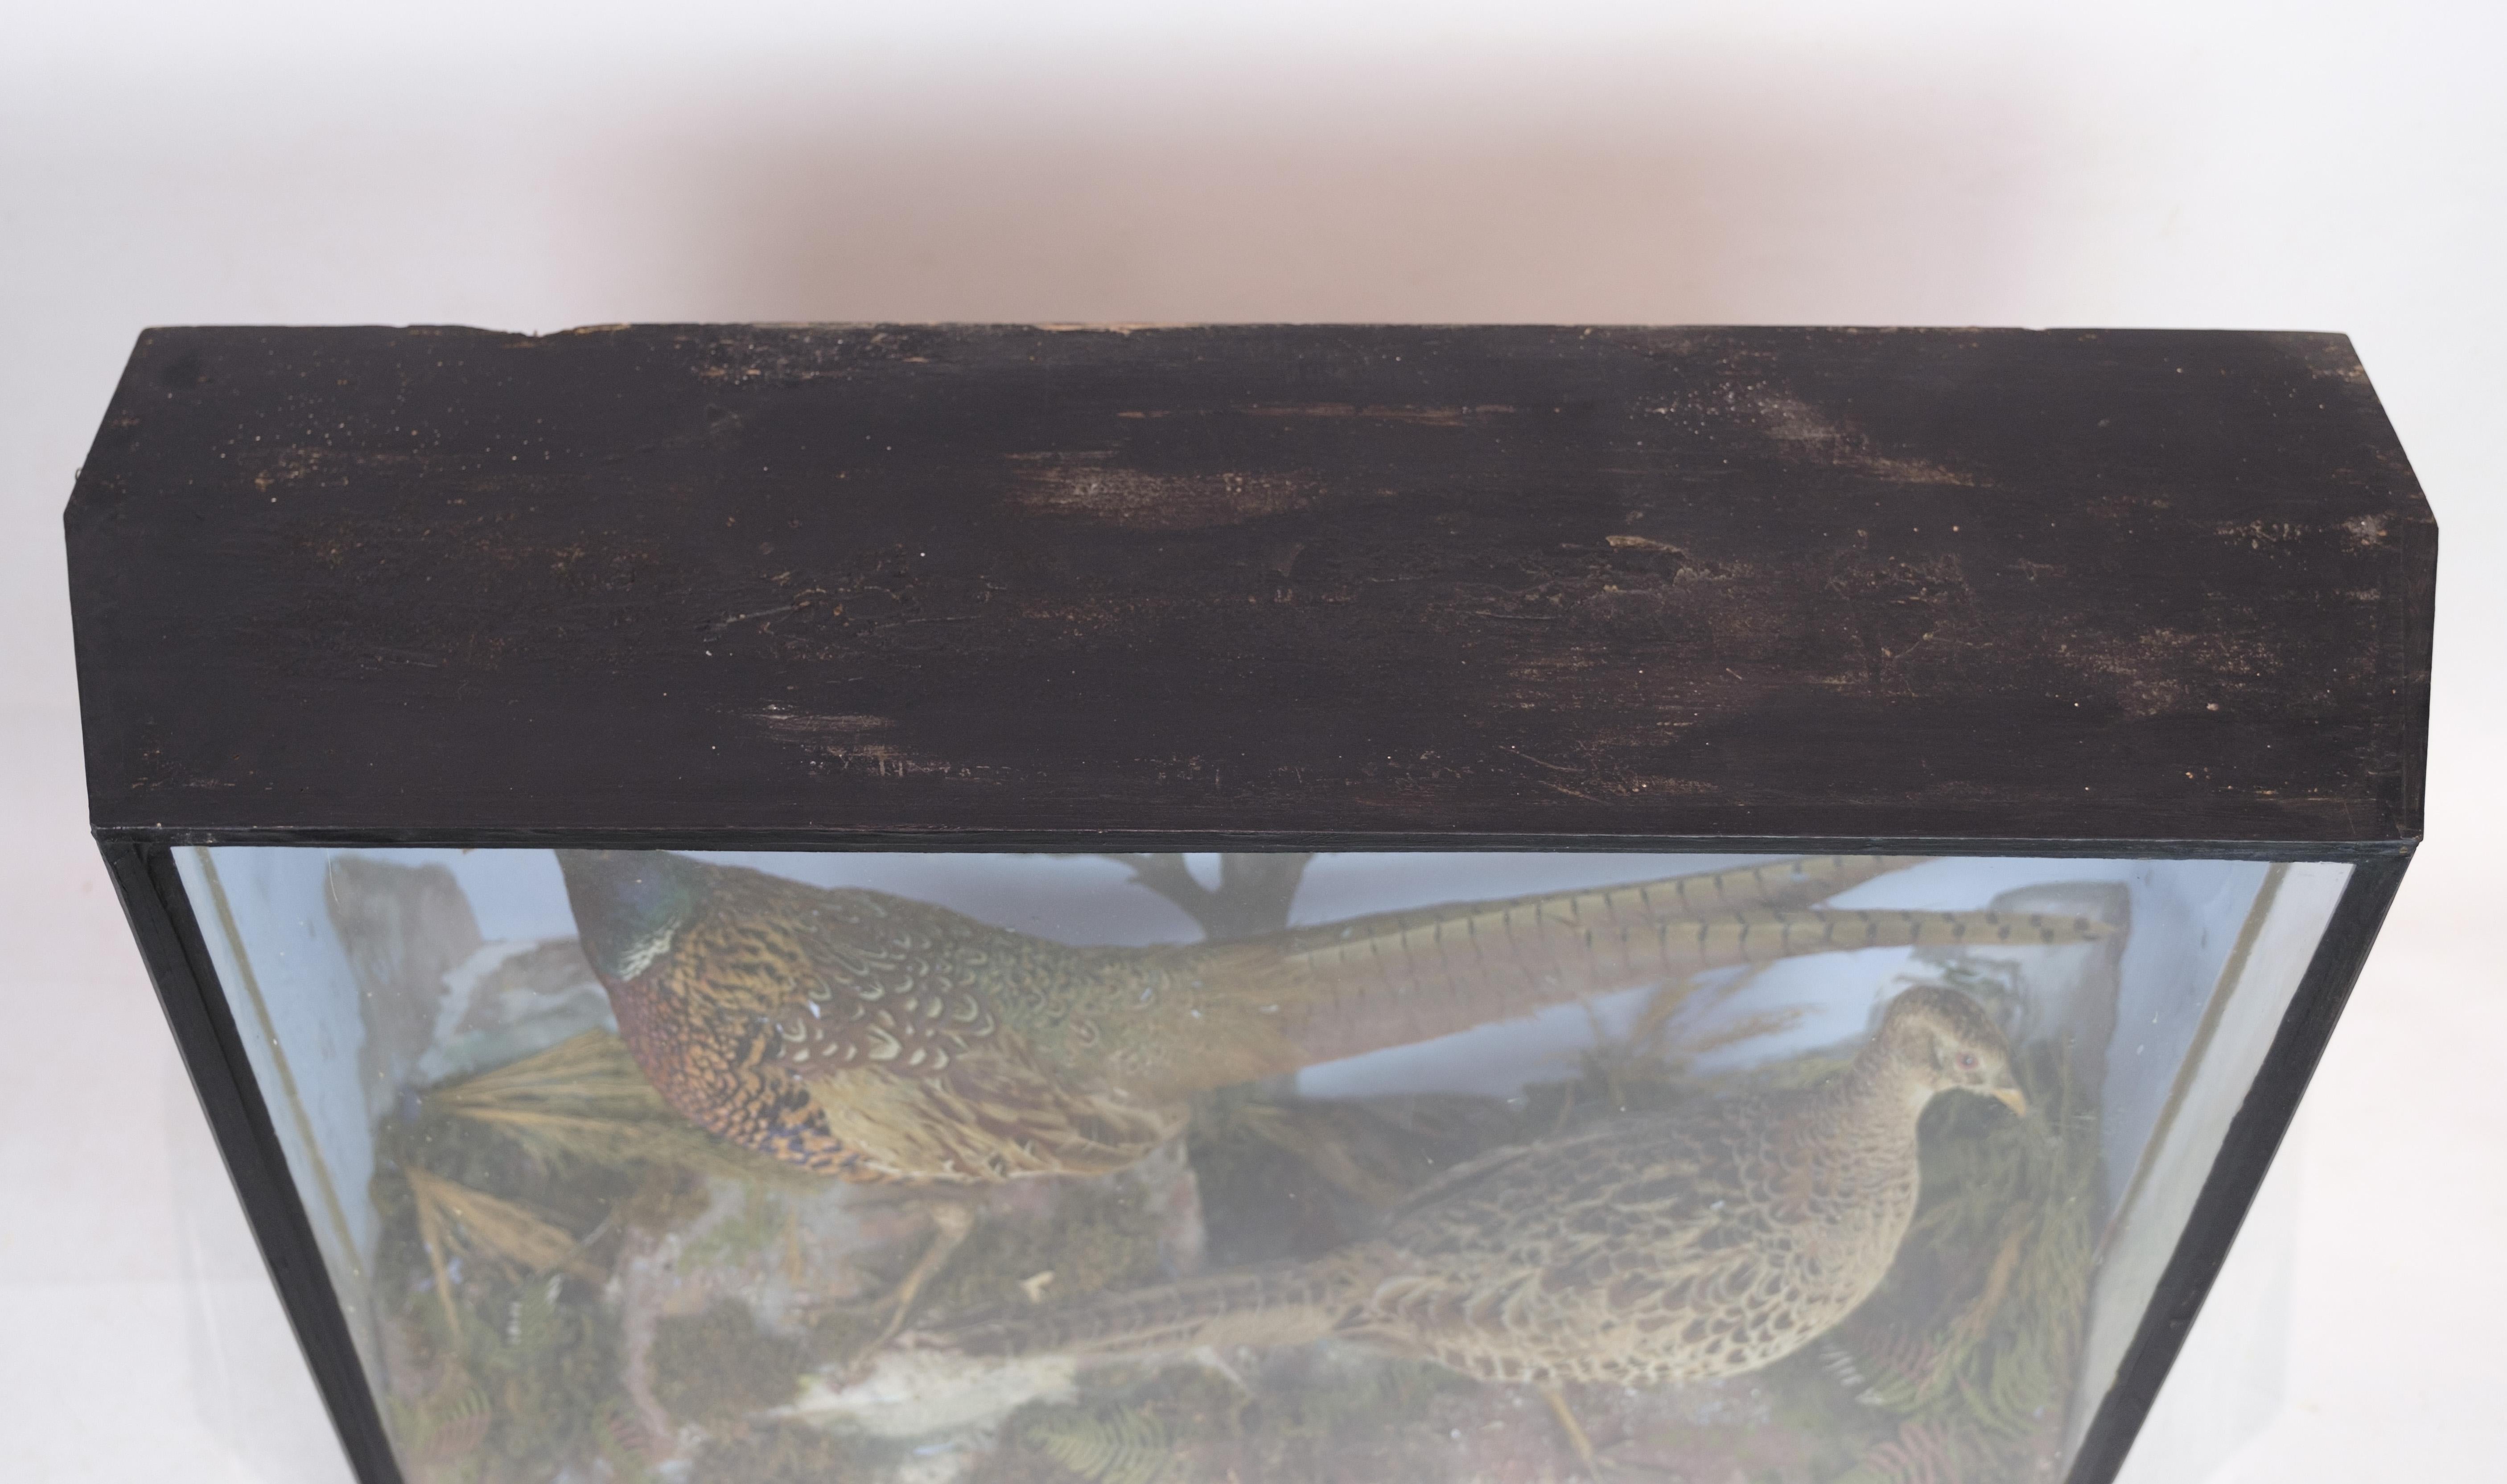 This captivating display cabinet, adorned with a male and female pair of pheasants, reflects the aesthetic charm of the 1960s. While details about the designer and manufacturer are unavailable, the cabinet's ornate design and nostalgic appeal make